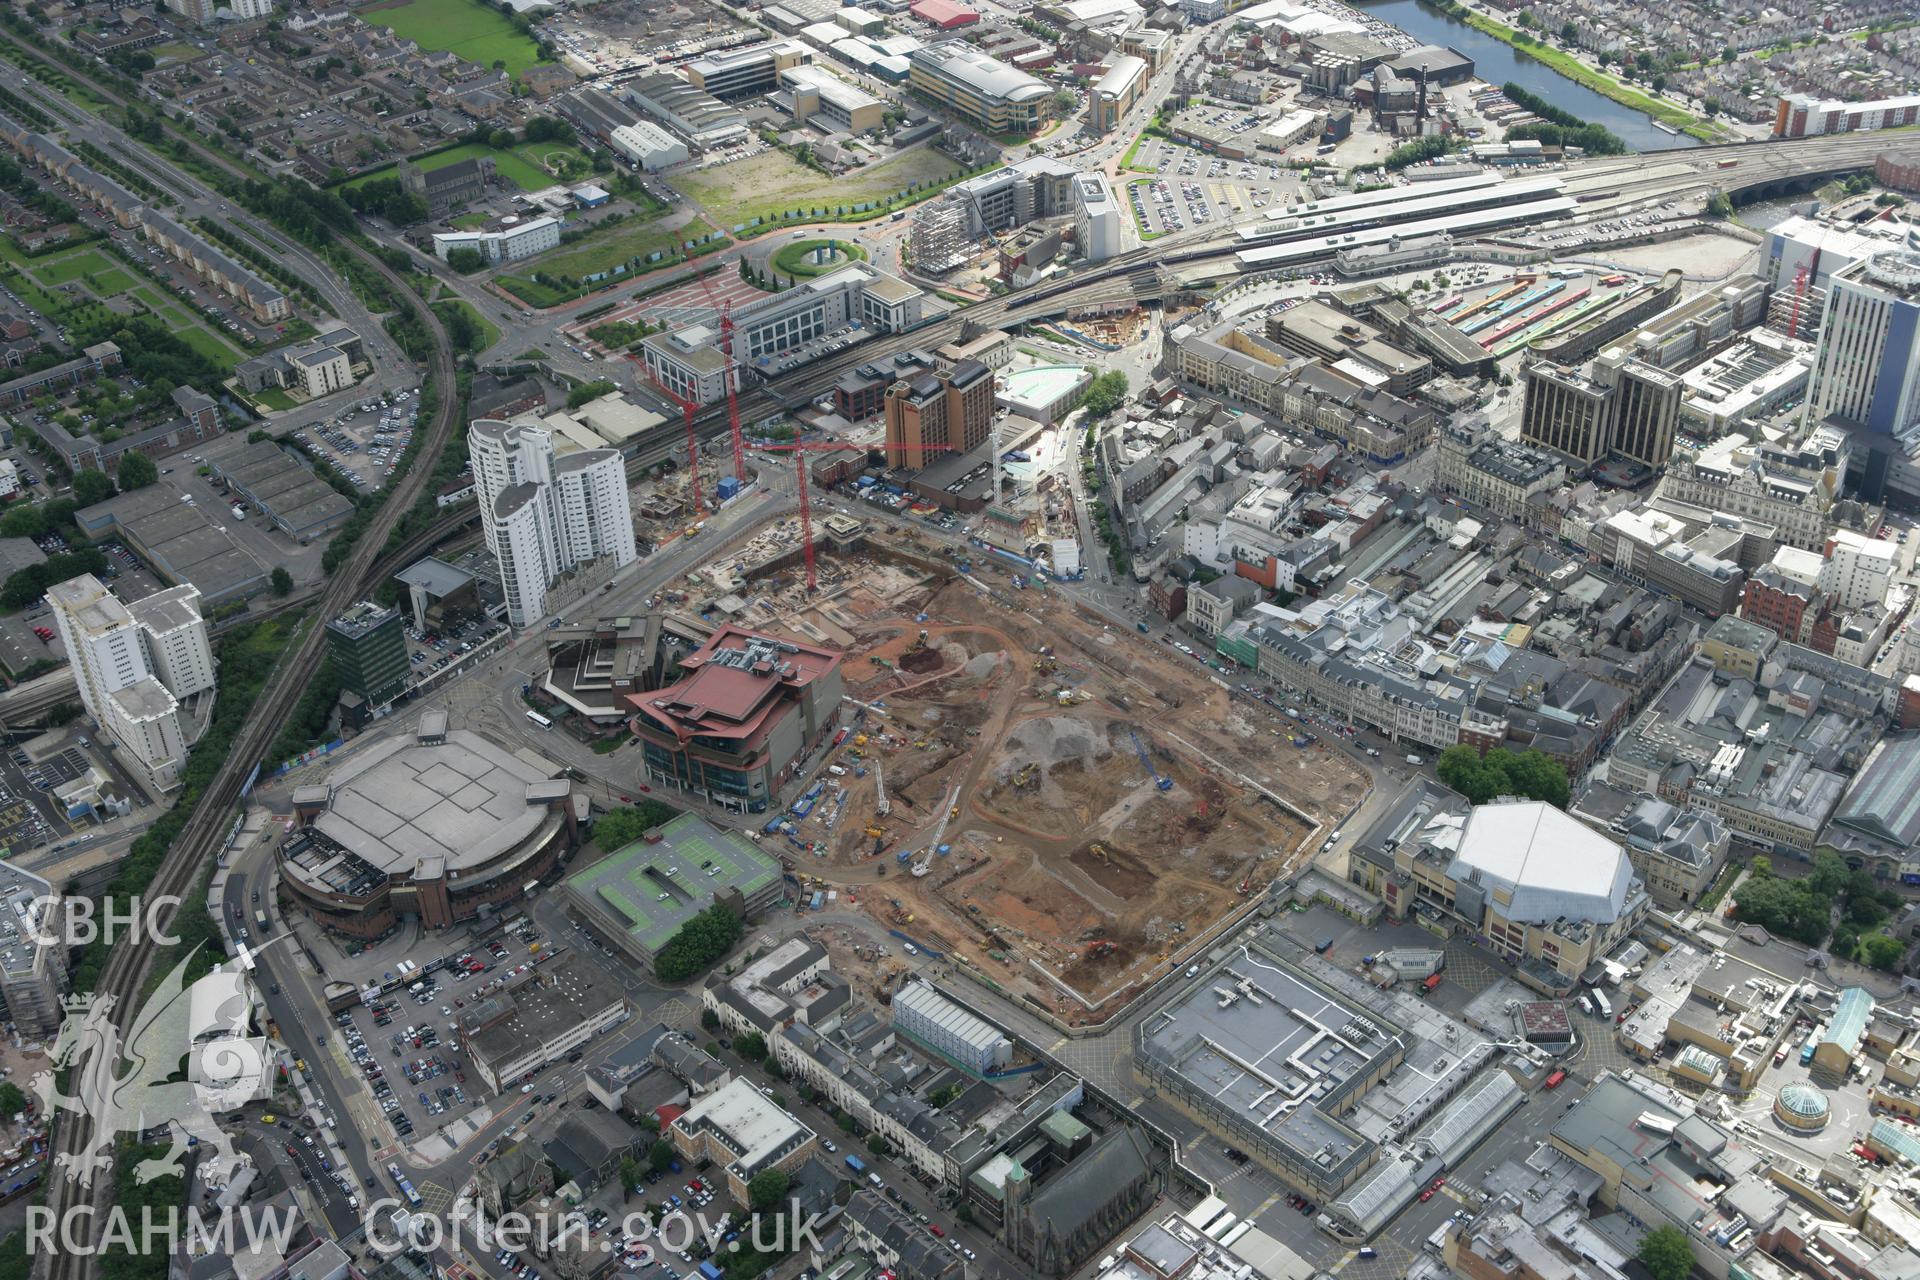 RCAHMW colour oblique aerial photograph of re-development in the centre of Cardiff. Taken on 30 July 2007 by Toby Driver